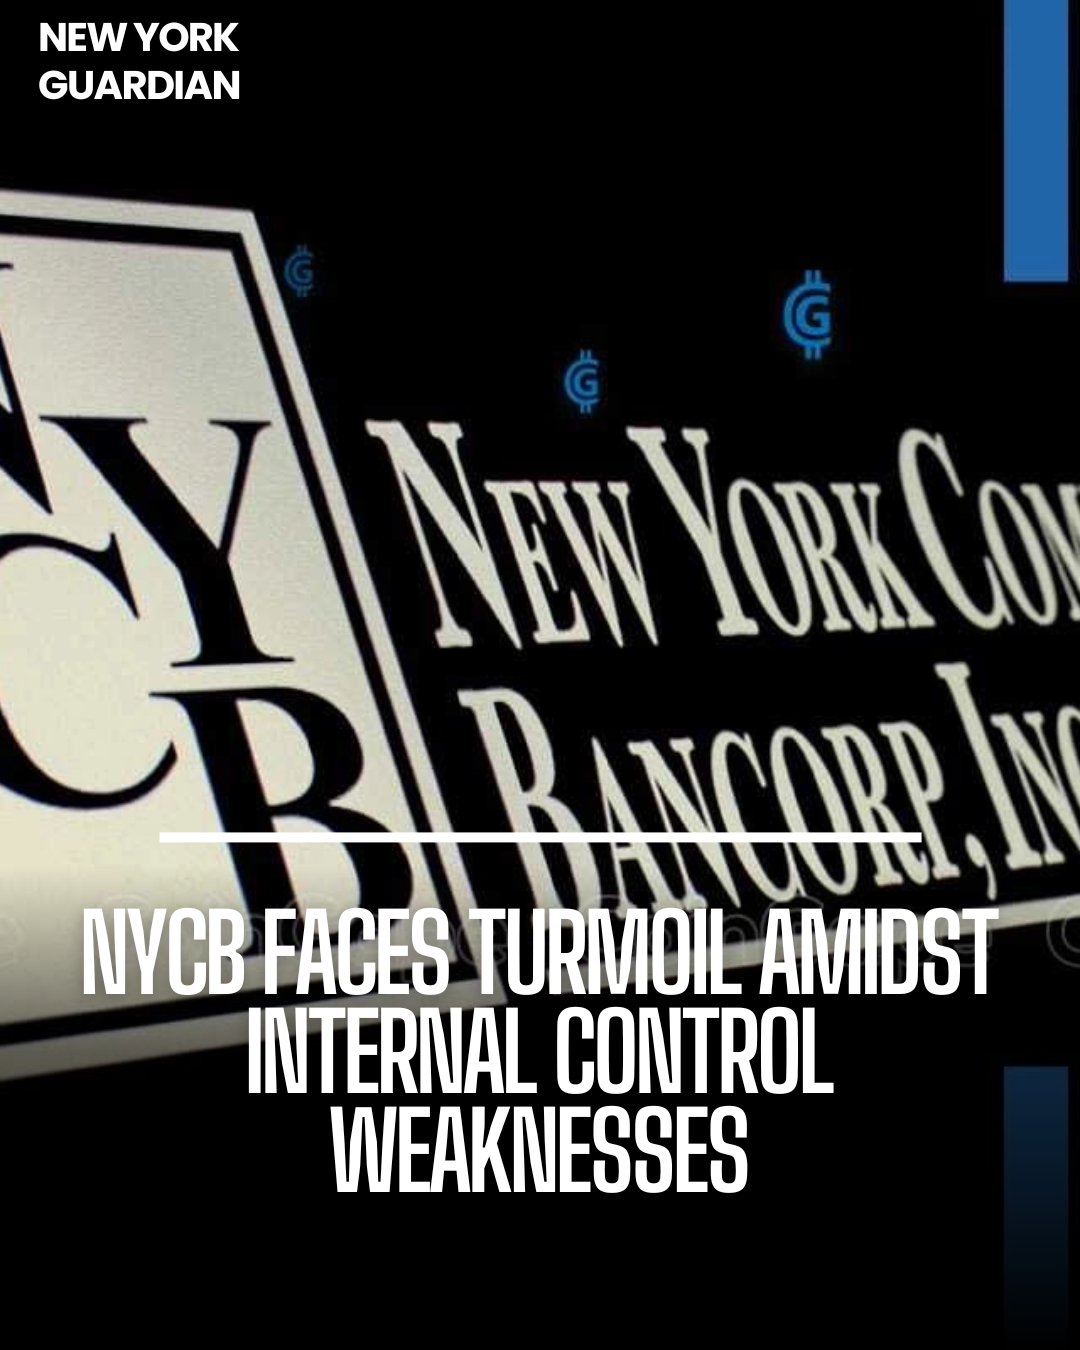 The revelation of "material weaknesses" in NYCB's internal controls sparked new Wall Street turbulence.